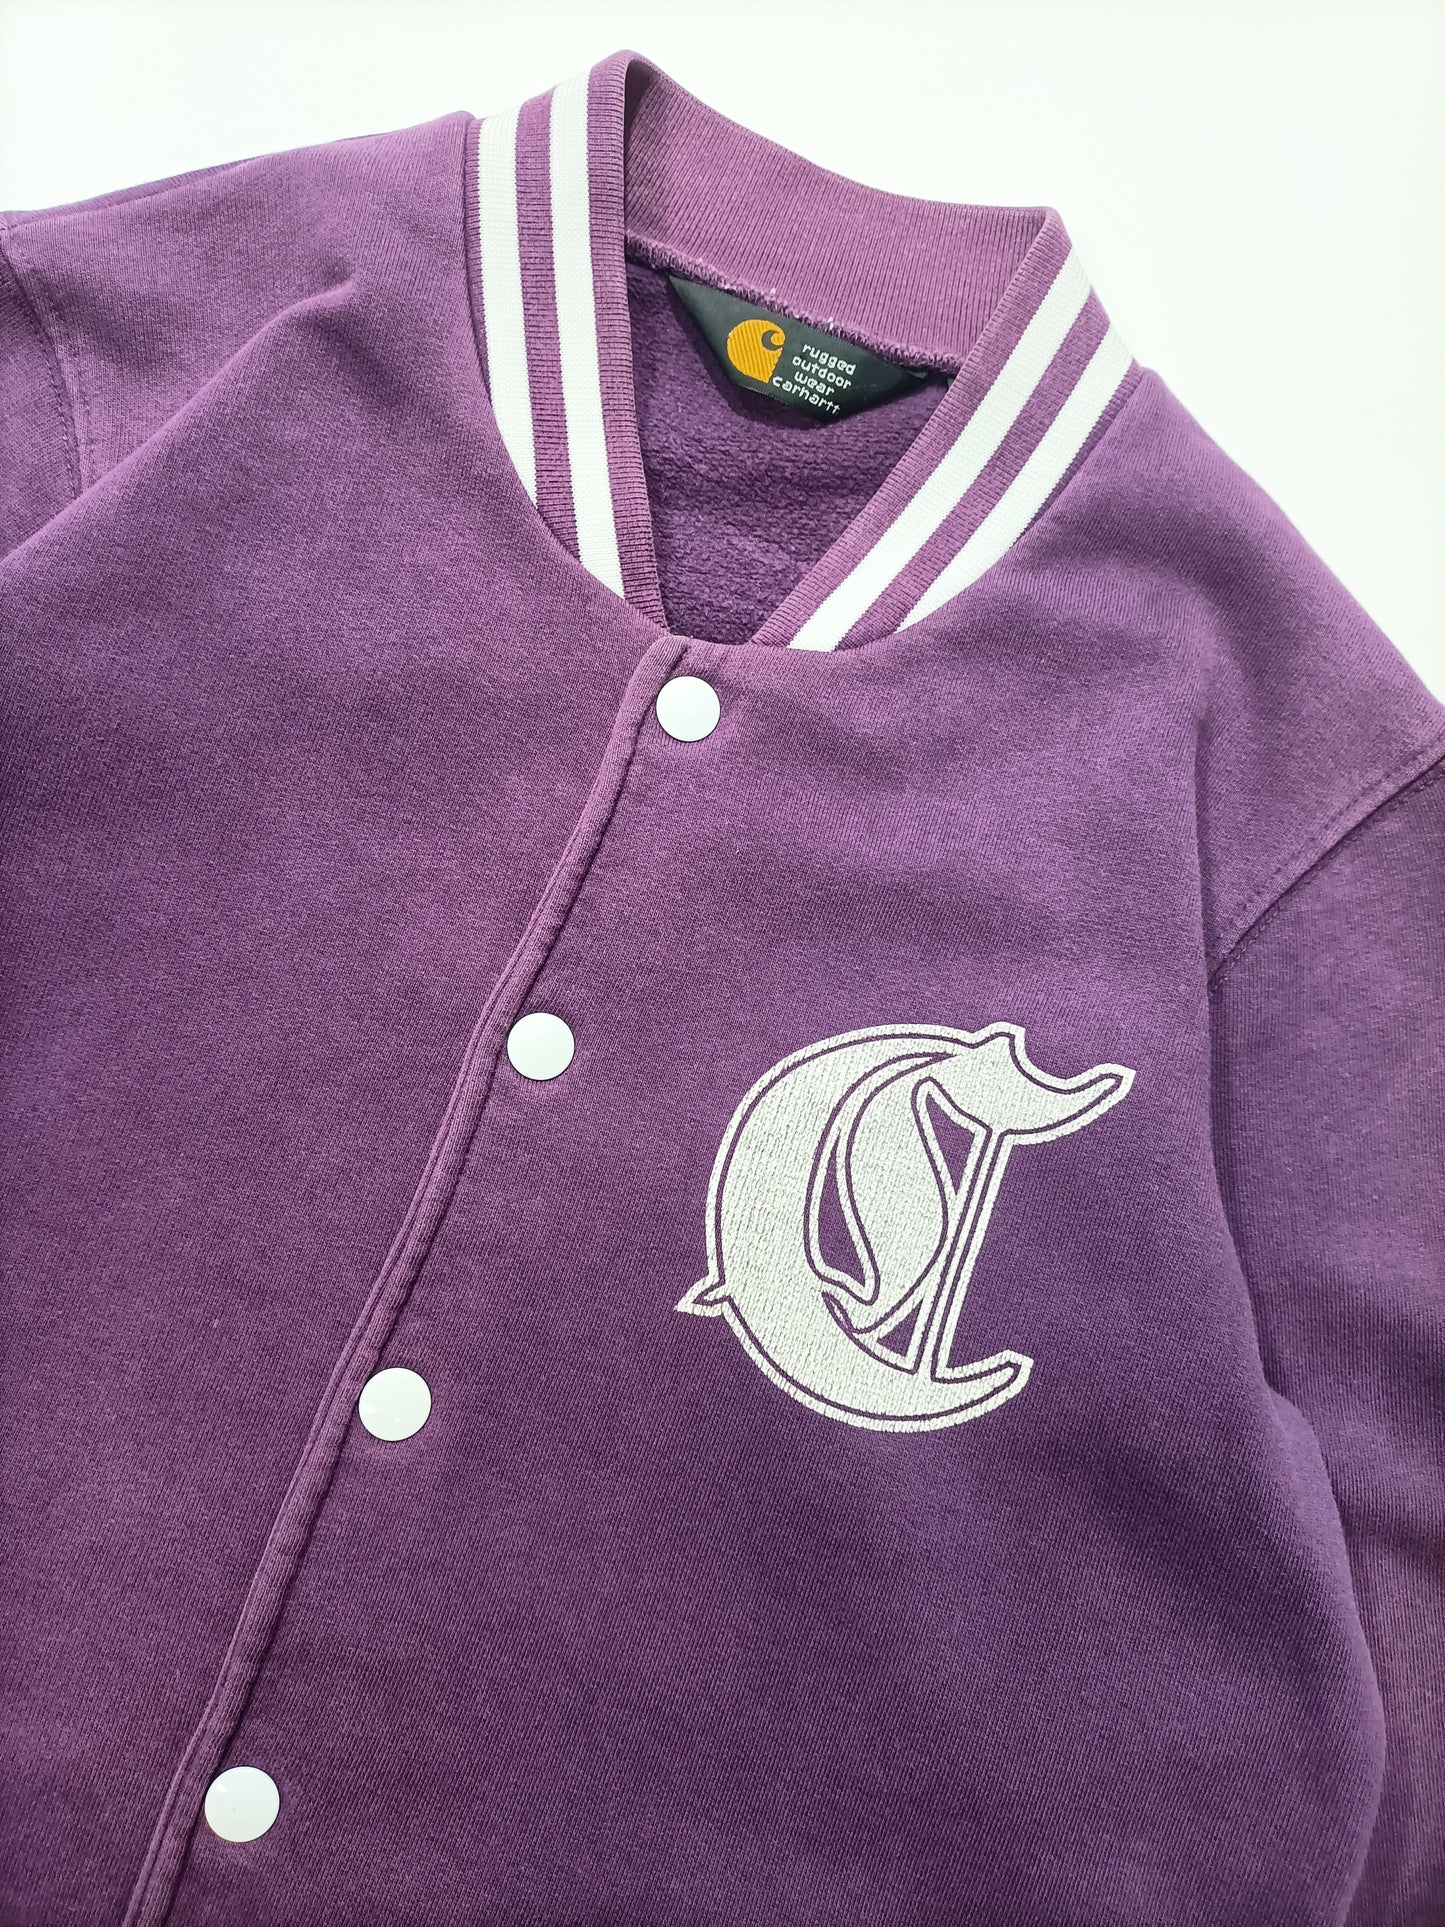 Giacca College - Carhartt Vintage (M)